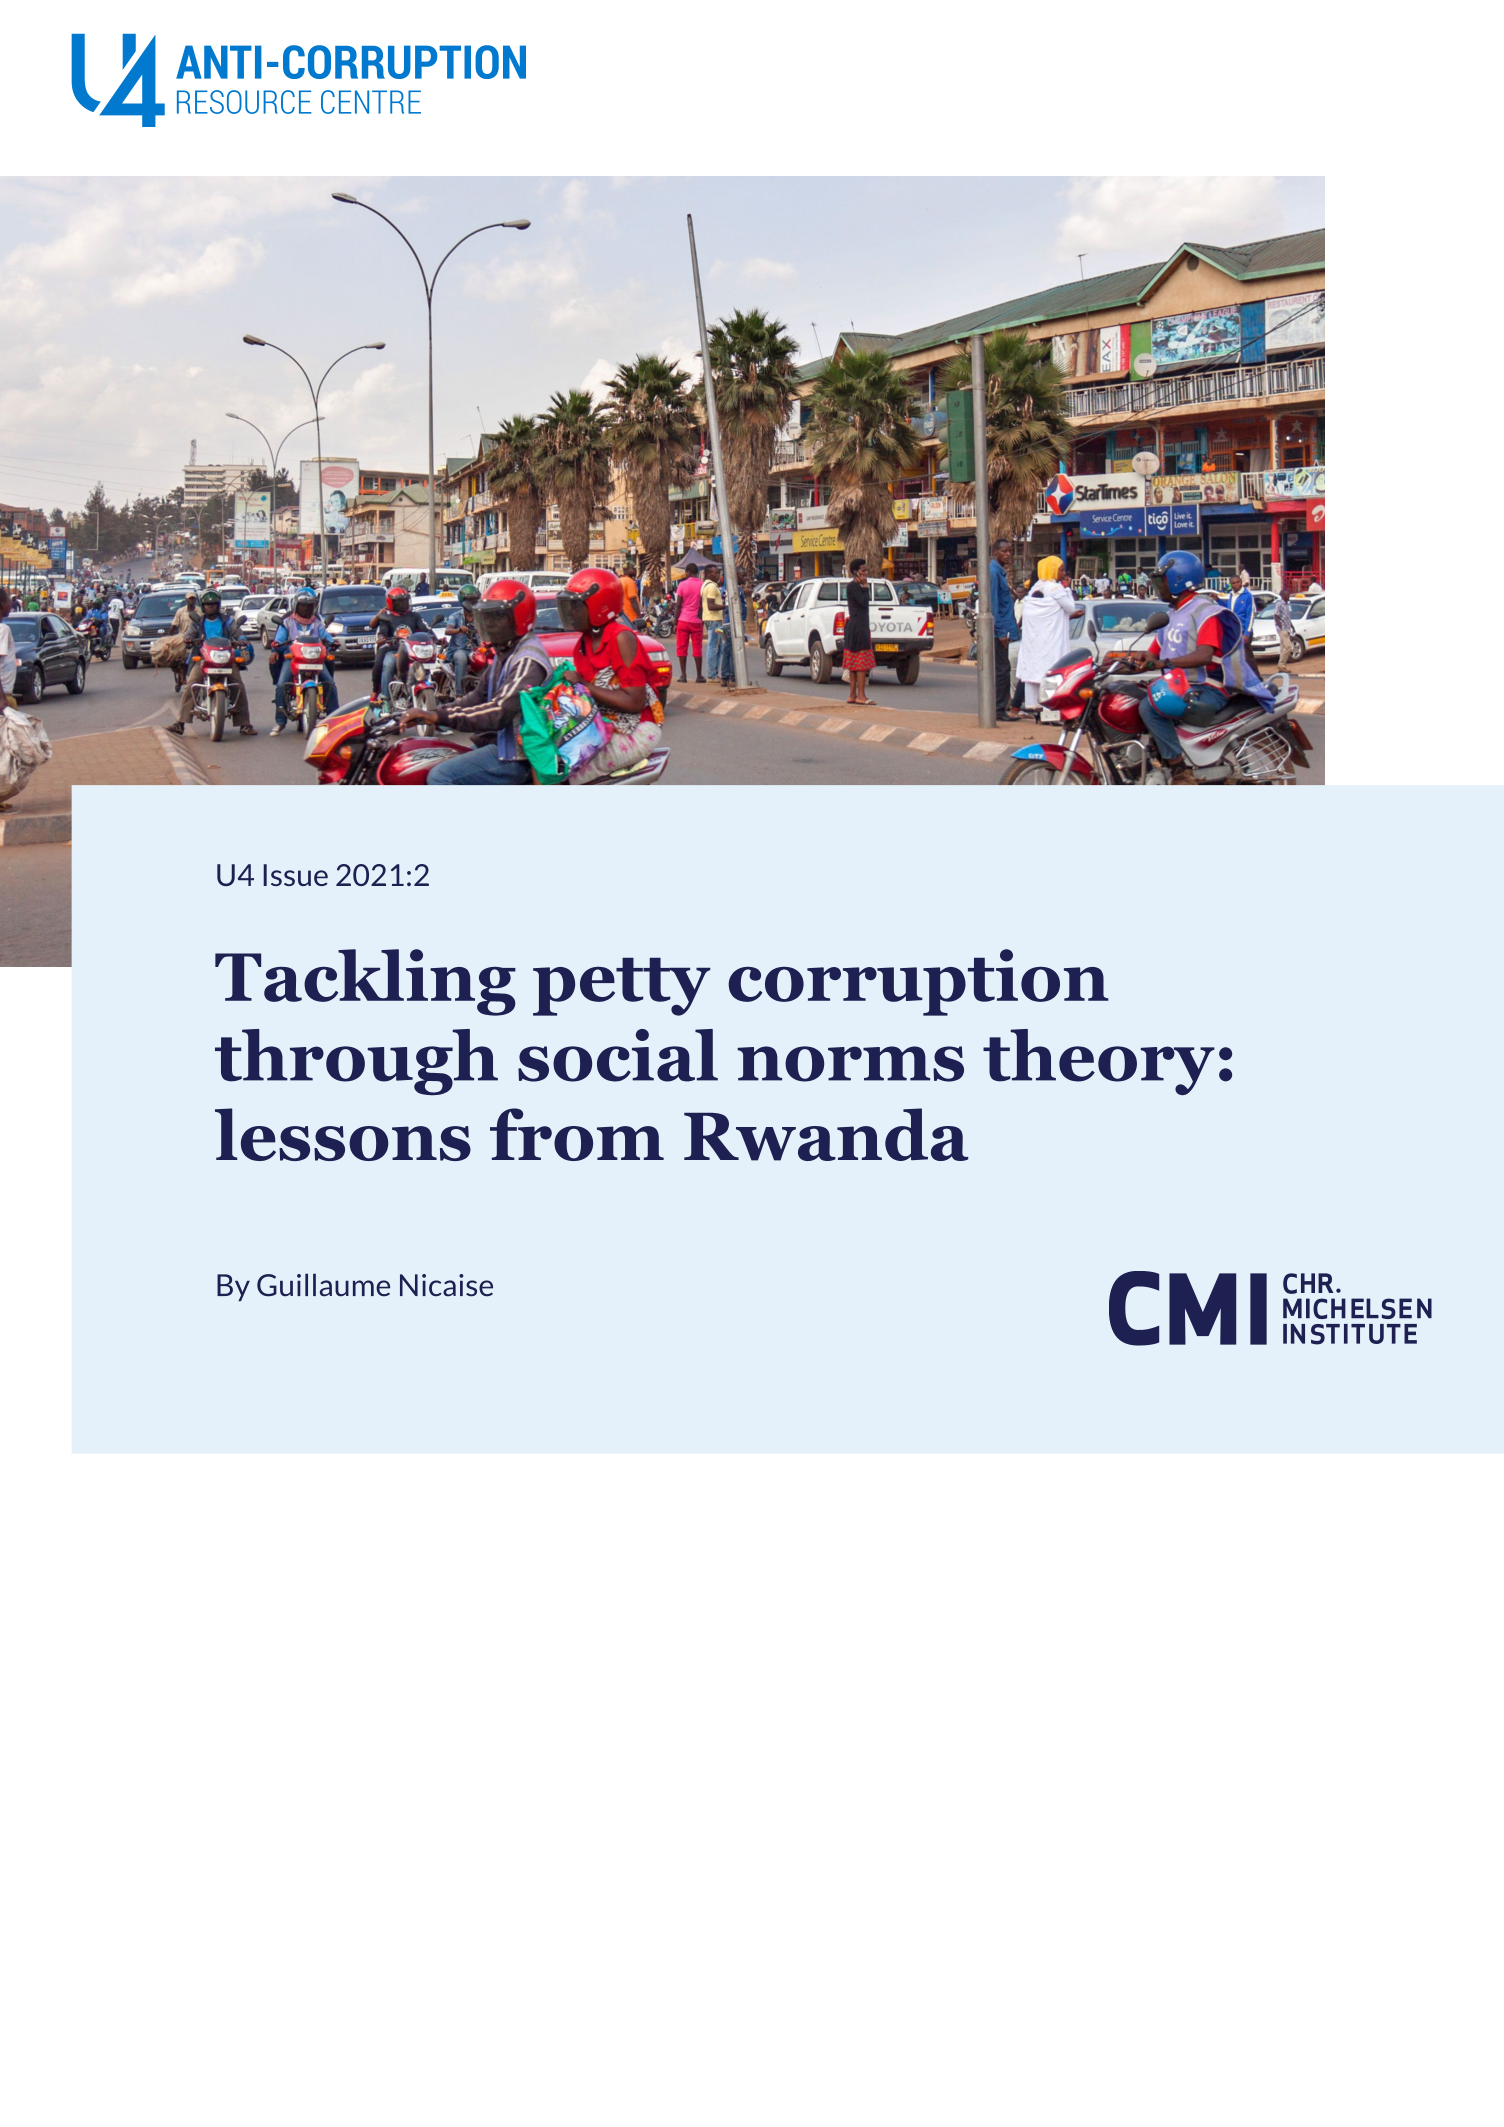 Tackling petty corruption through social norms theory: lessons from Rwanda